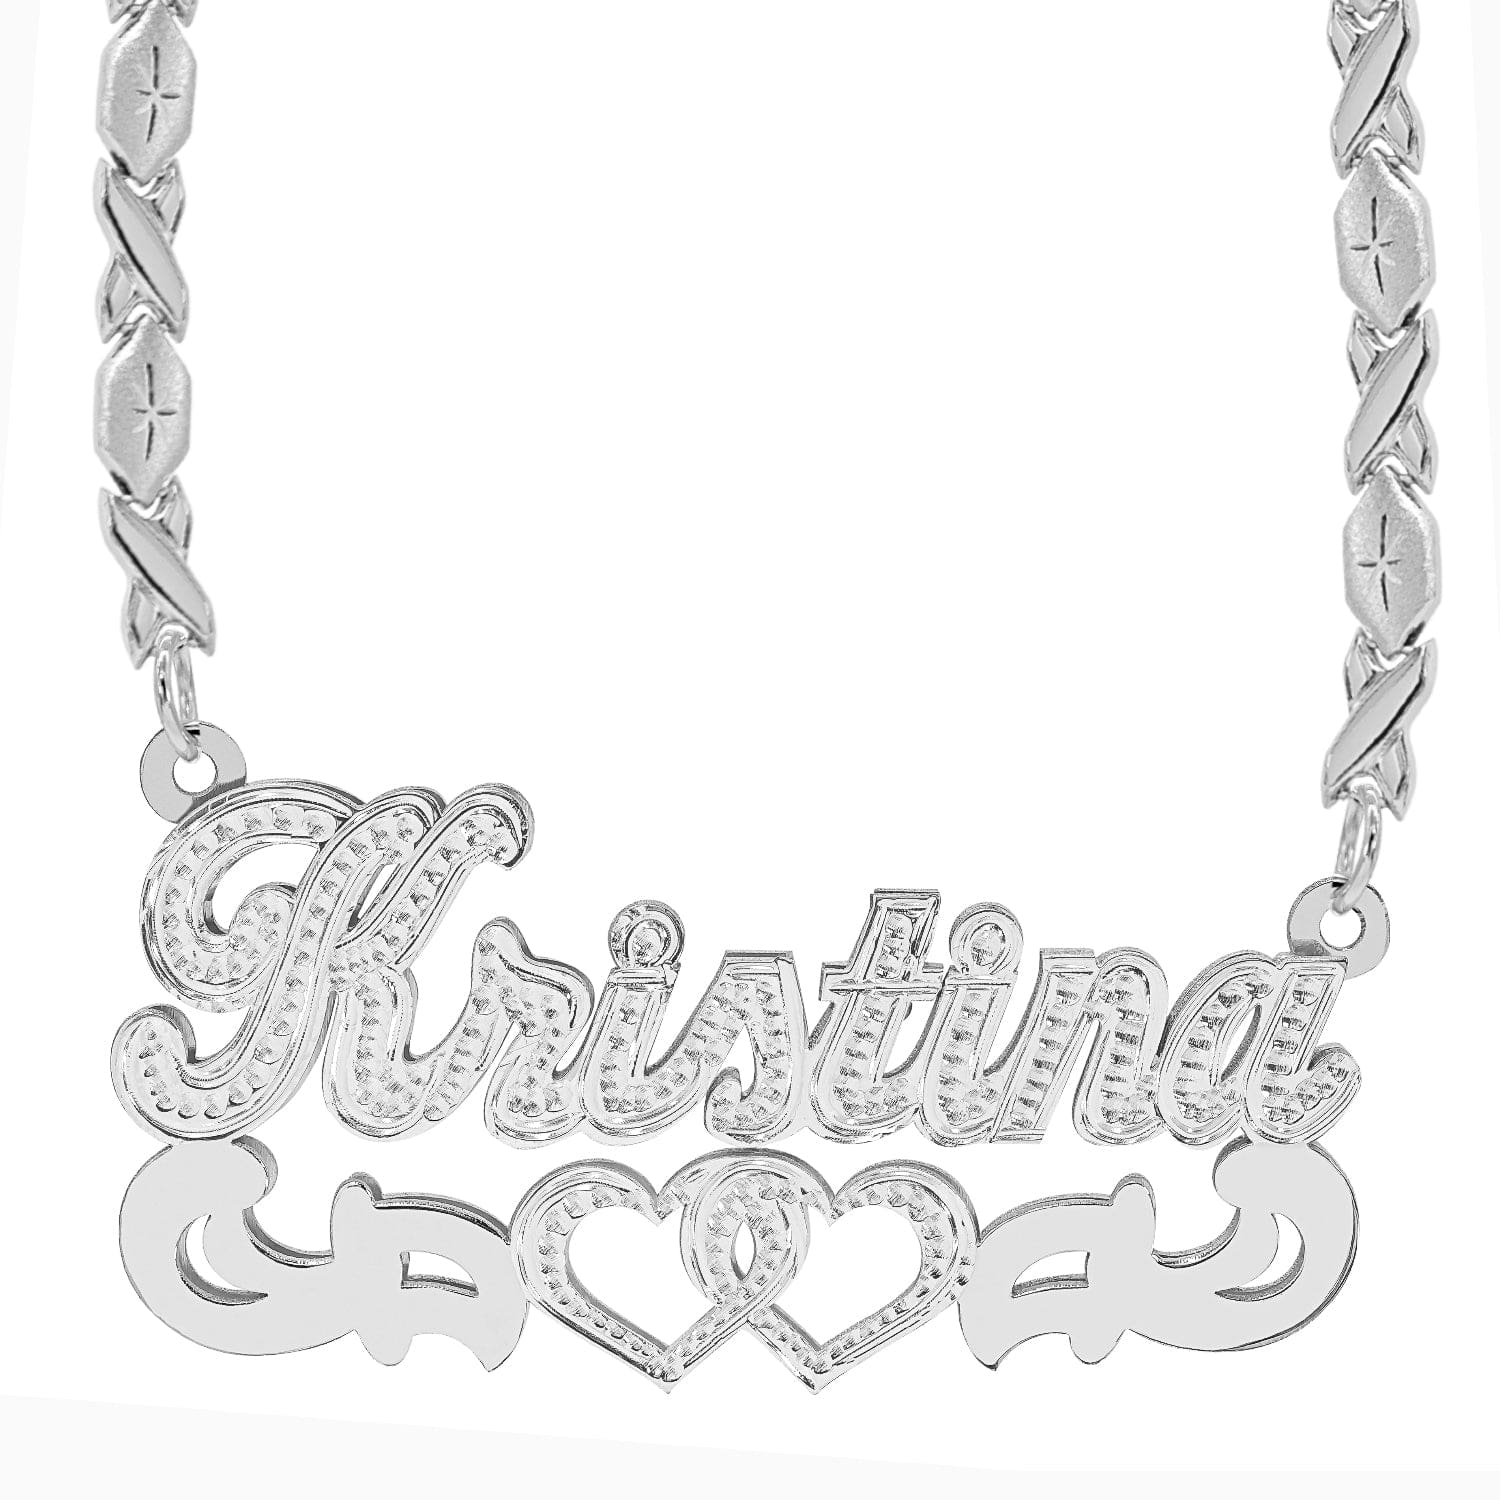 Two-Tone. Sterling Silver / Xoxo Chain Double Nameplate Necklace "Kristina" with Xoxo chain